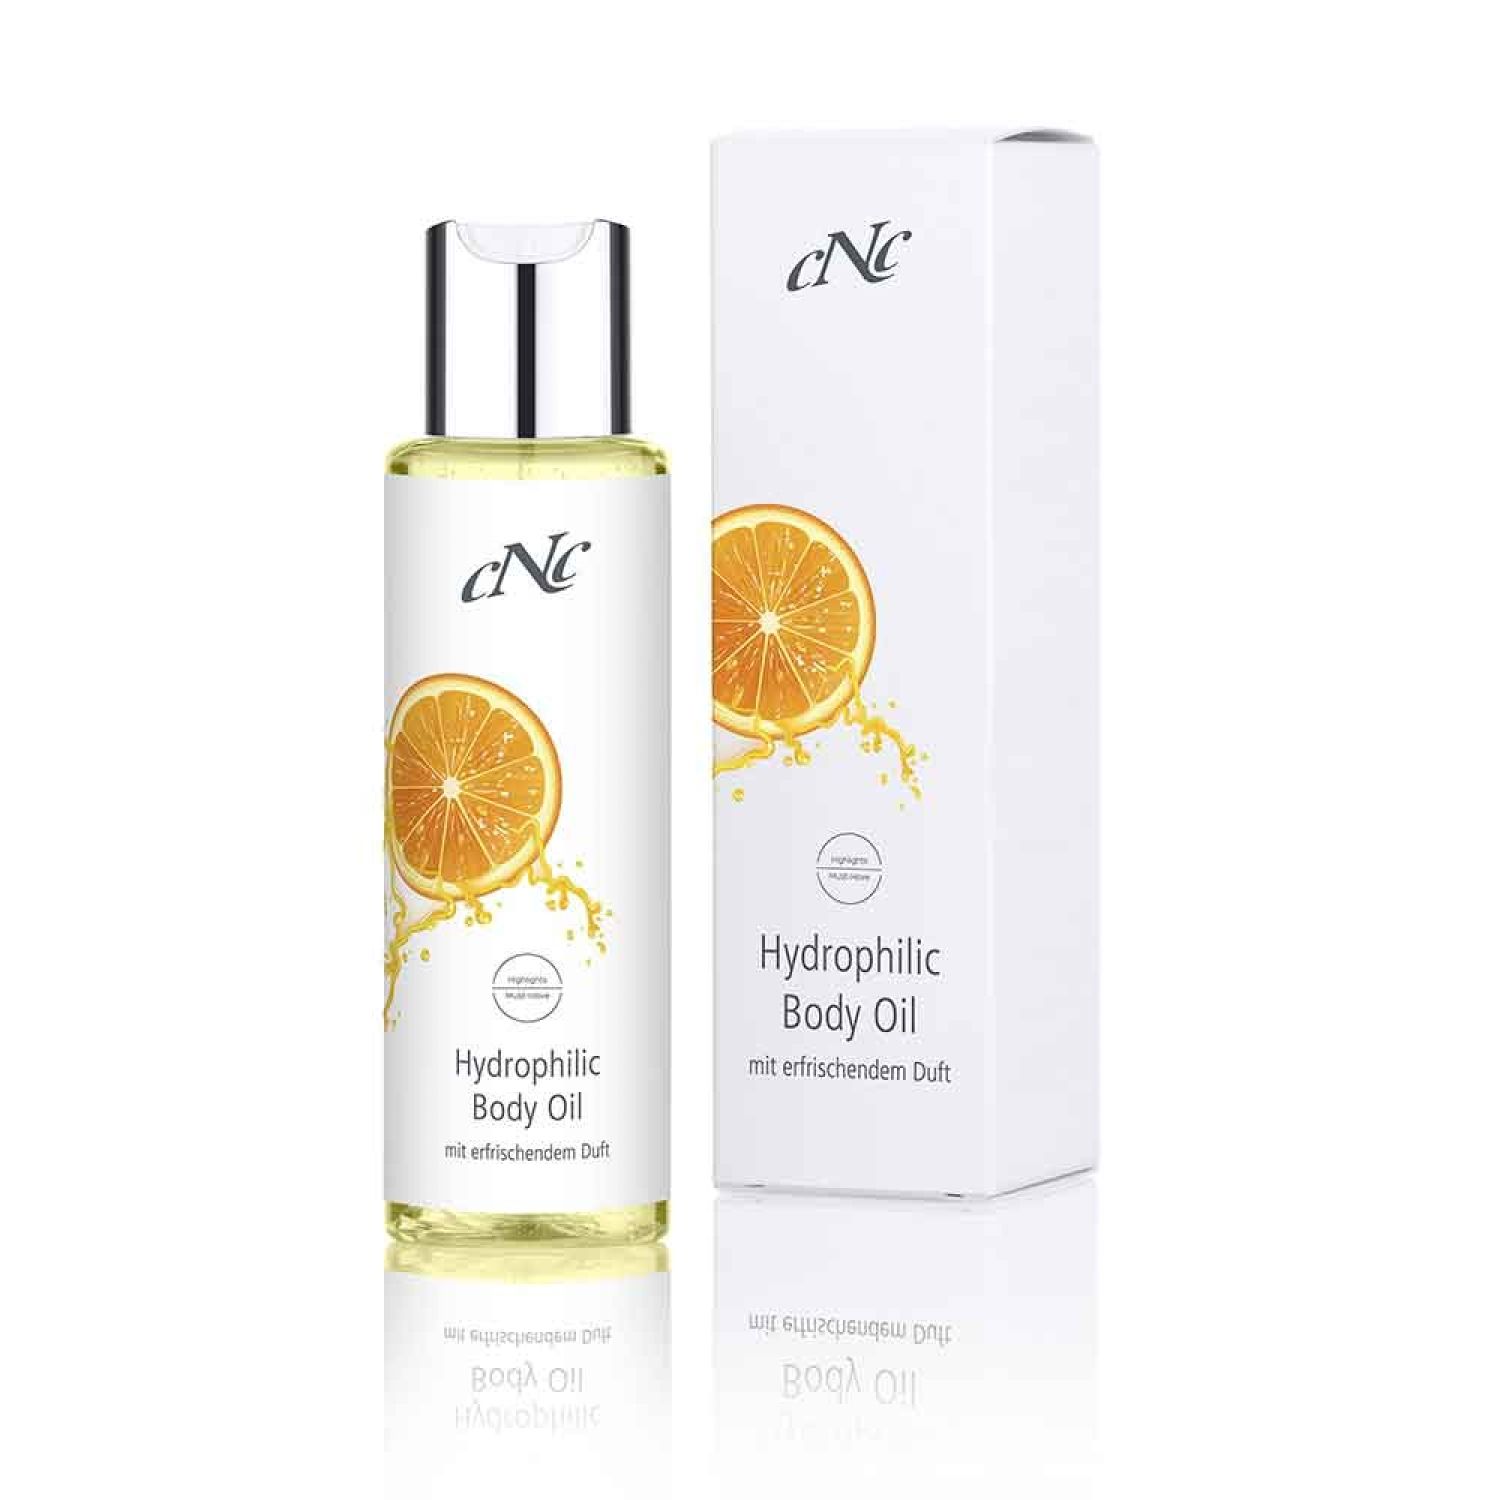 CNC cosmetic Highlights Hydrophilic Body Oil